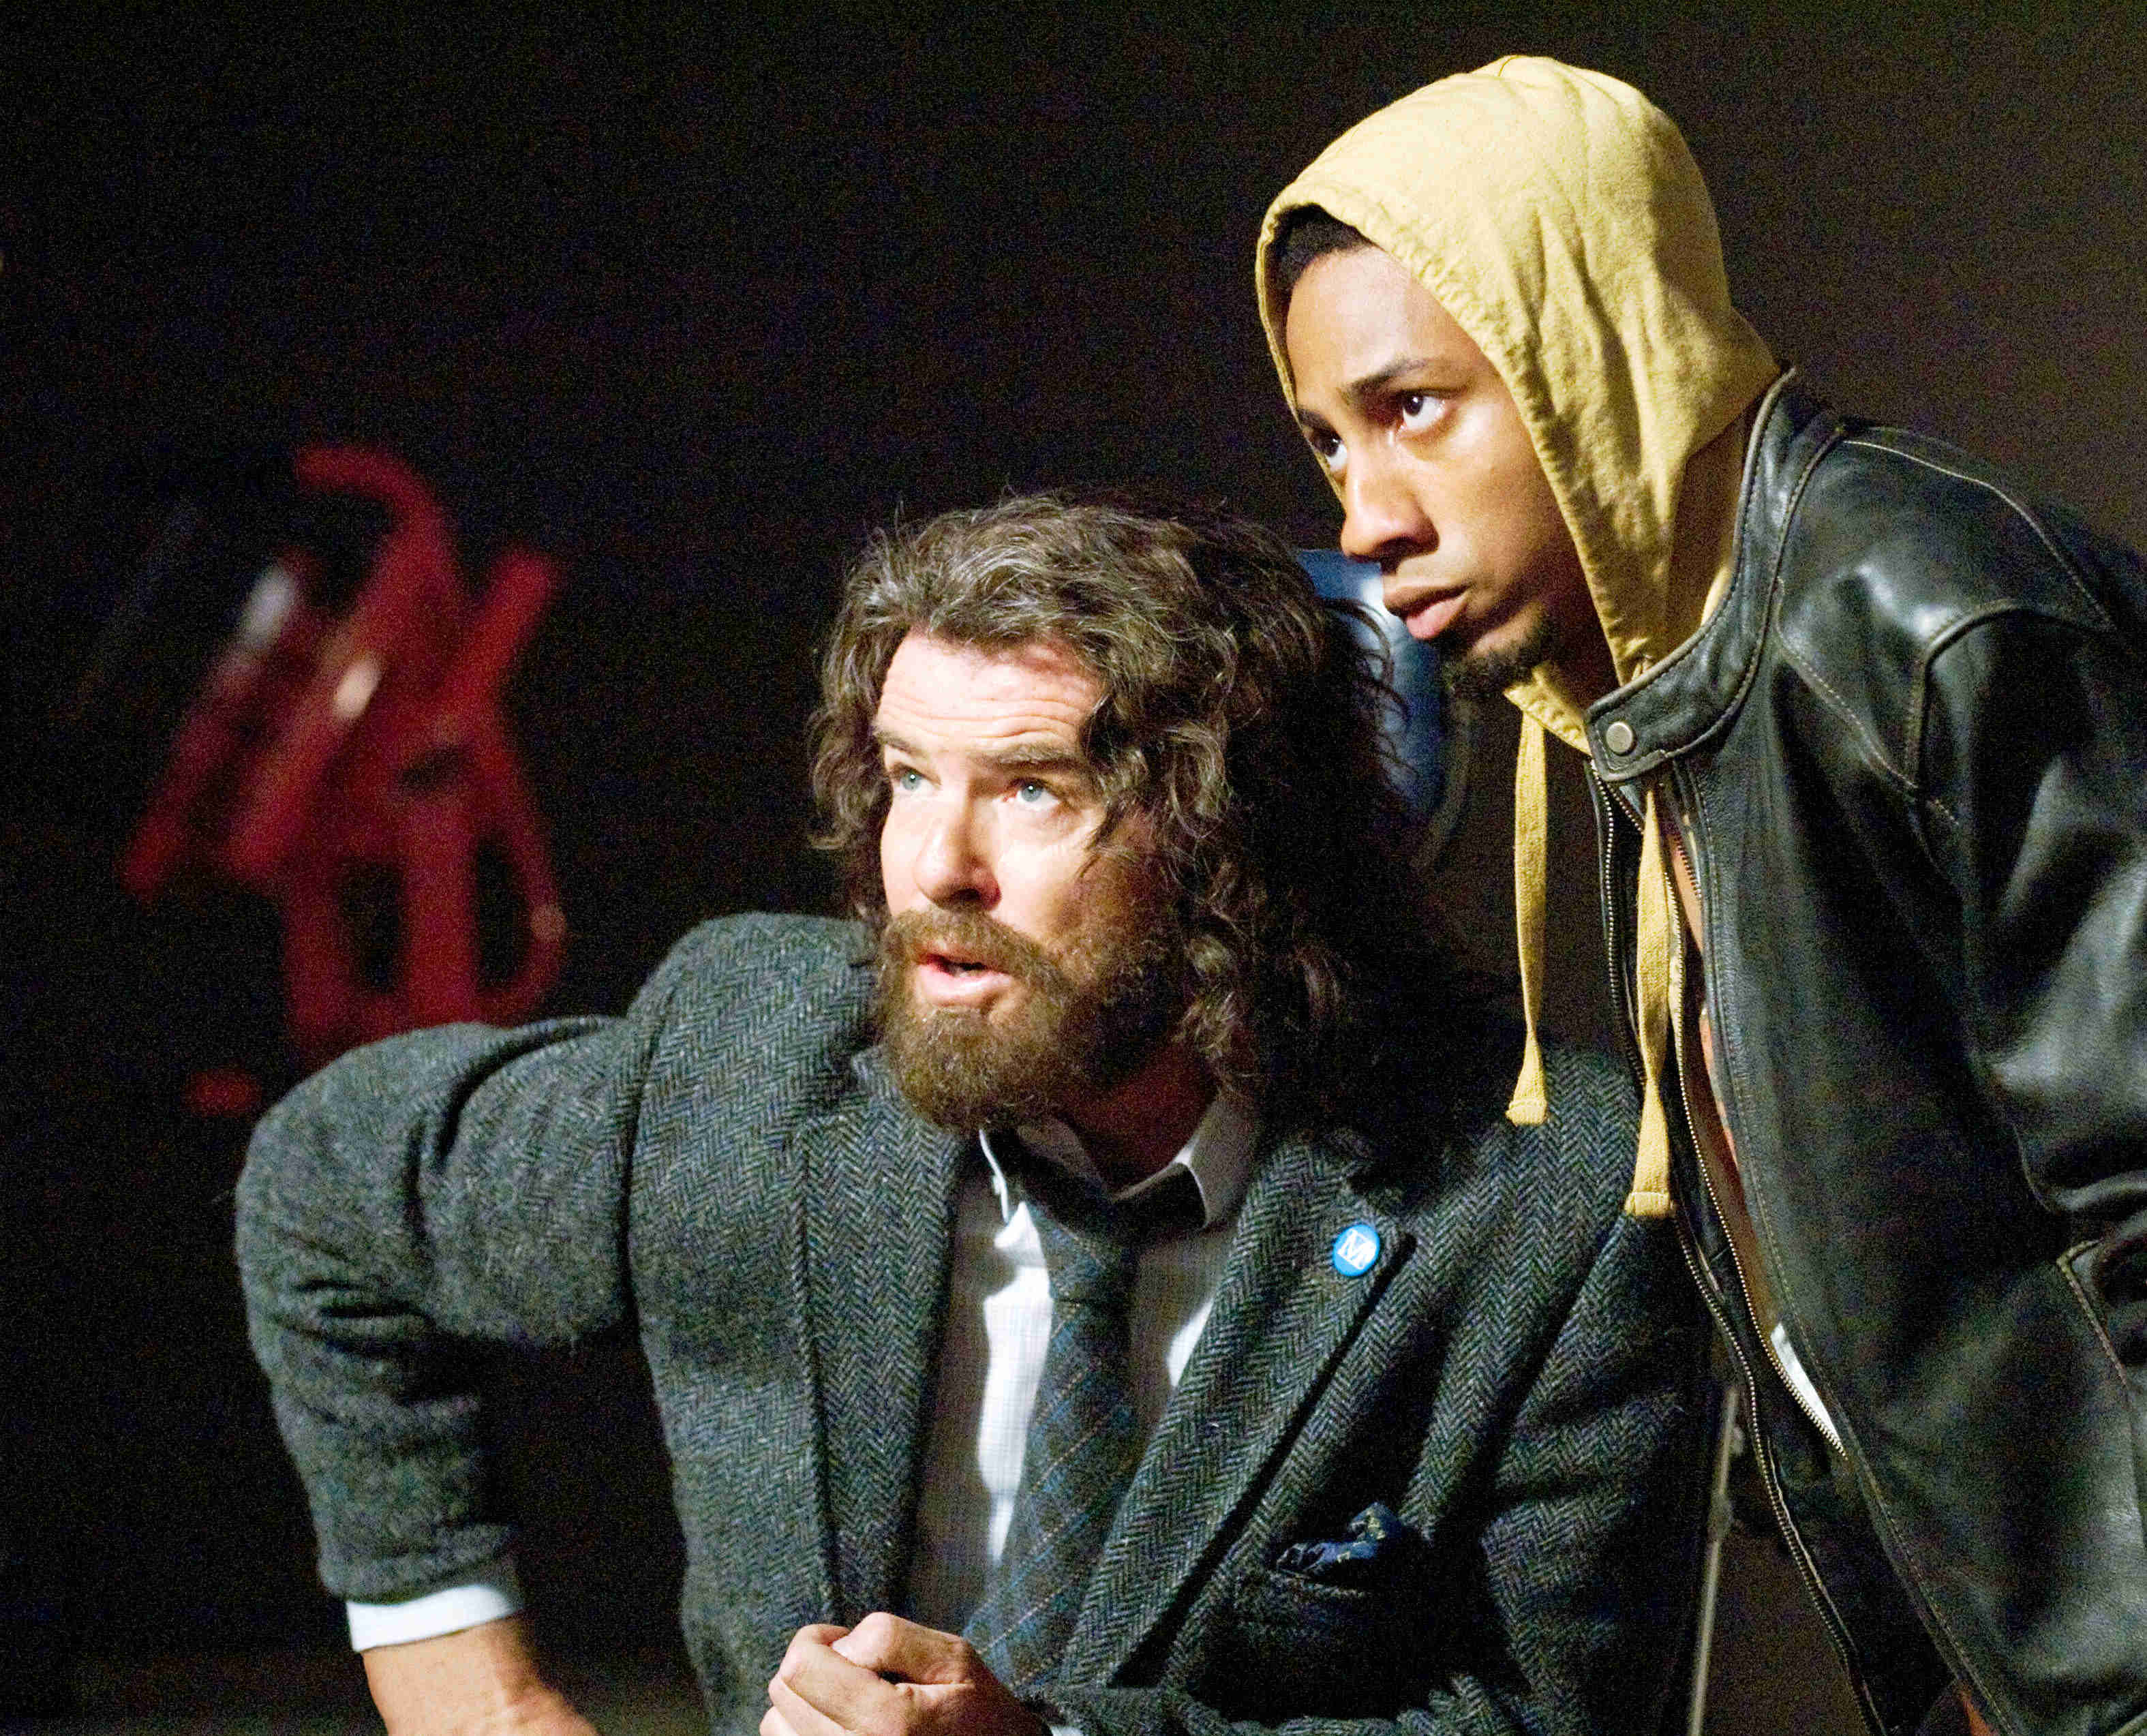 Pierce Brosnan stars as Chiron and Brandon T. Jackson stars as Grover Underwood in Fox 2000 Pictures' Percy Jackson & the Olympians: The Lightning Thief (2010). Photo credit Doane Gregory.